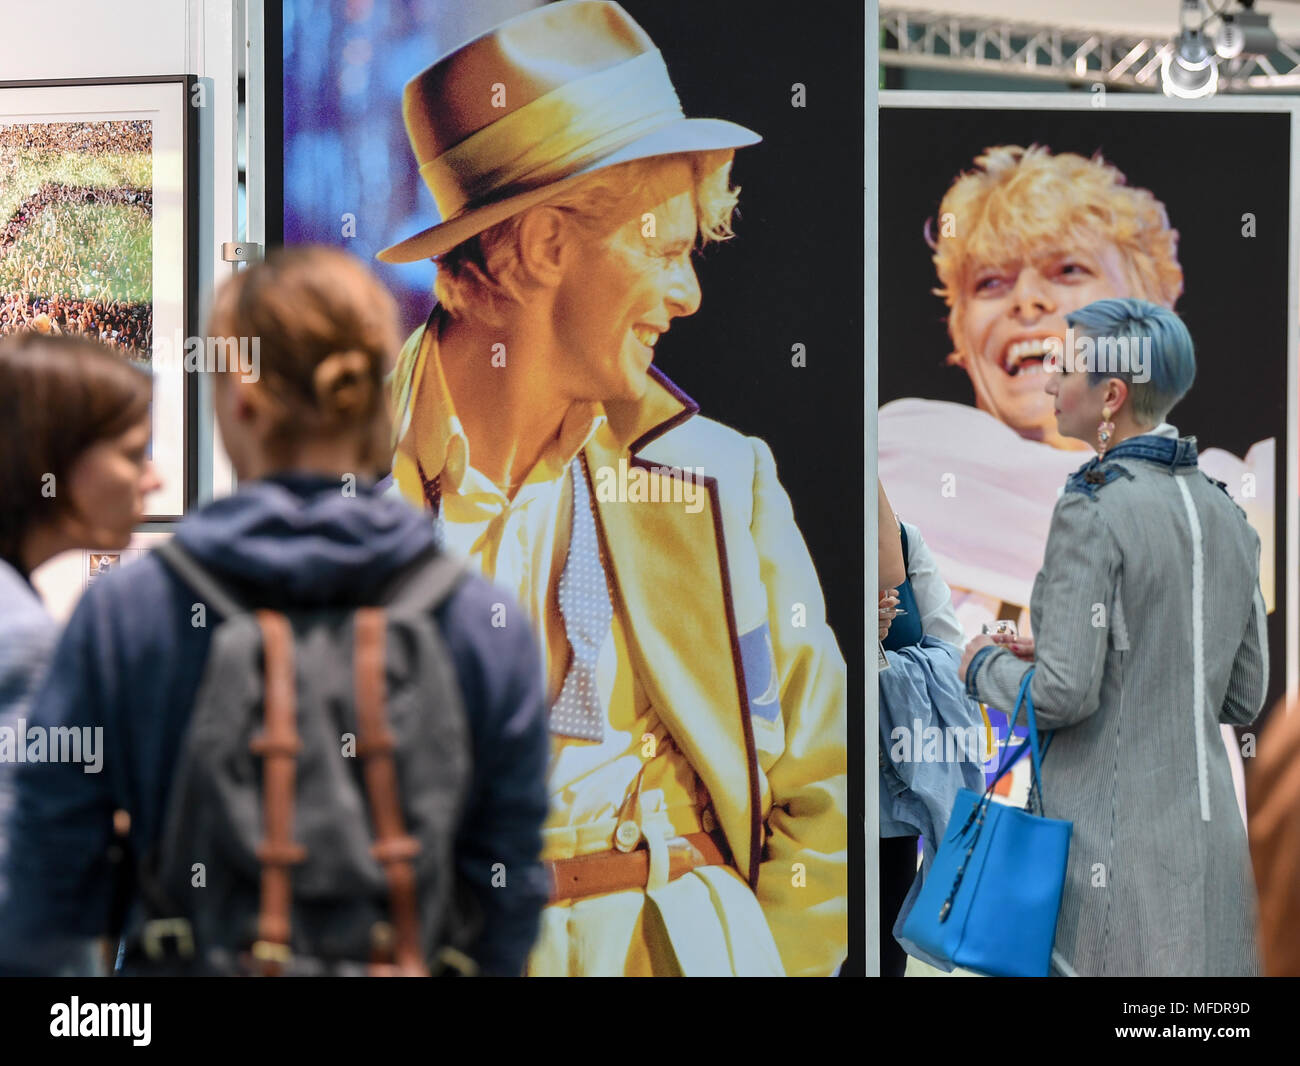 25 April 2018, Germany, Berlin: A pop-up exhibition 'David & I' from artist Denis O'Regan has 50 photos of David Bowie opened at the car exhibition from Aston Martin with support from the British embassy. O'Regan accompanied Bowie at many events and offers a special insight into backstage moment. Photo: Jens Kalaene/dpa-Zentralbild/dpa - ATTENTION: only for use in full format Stock Photo